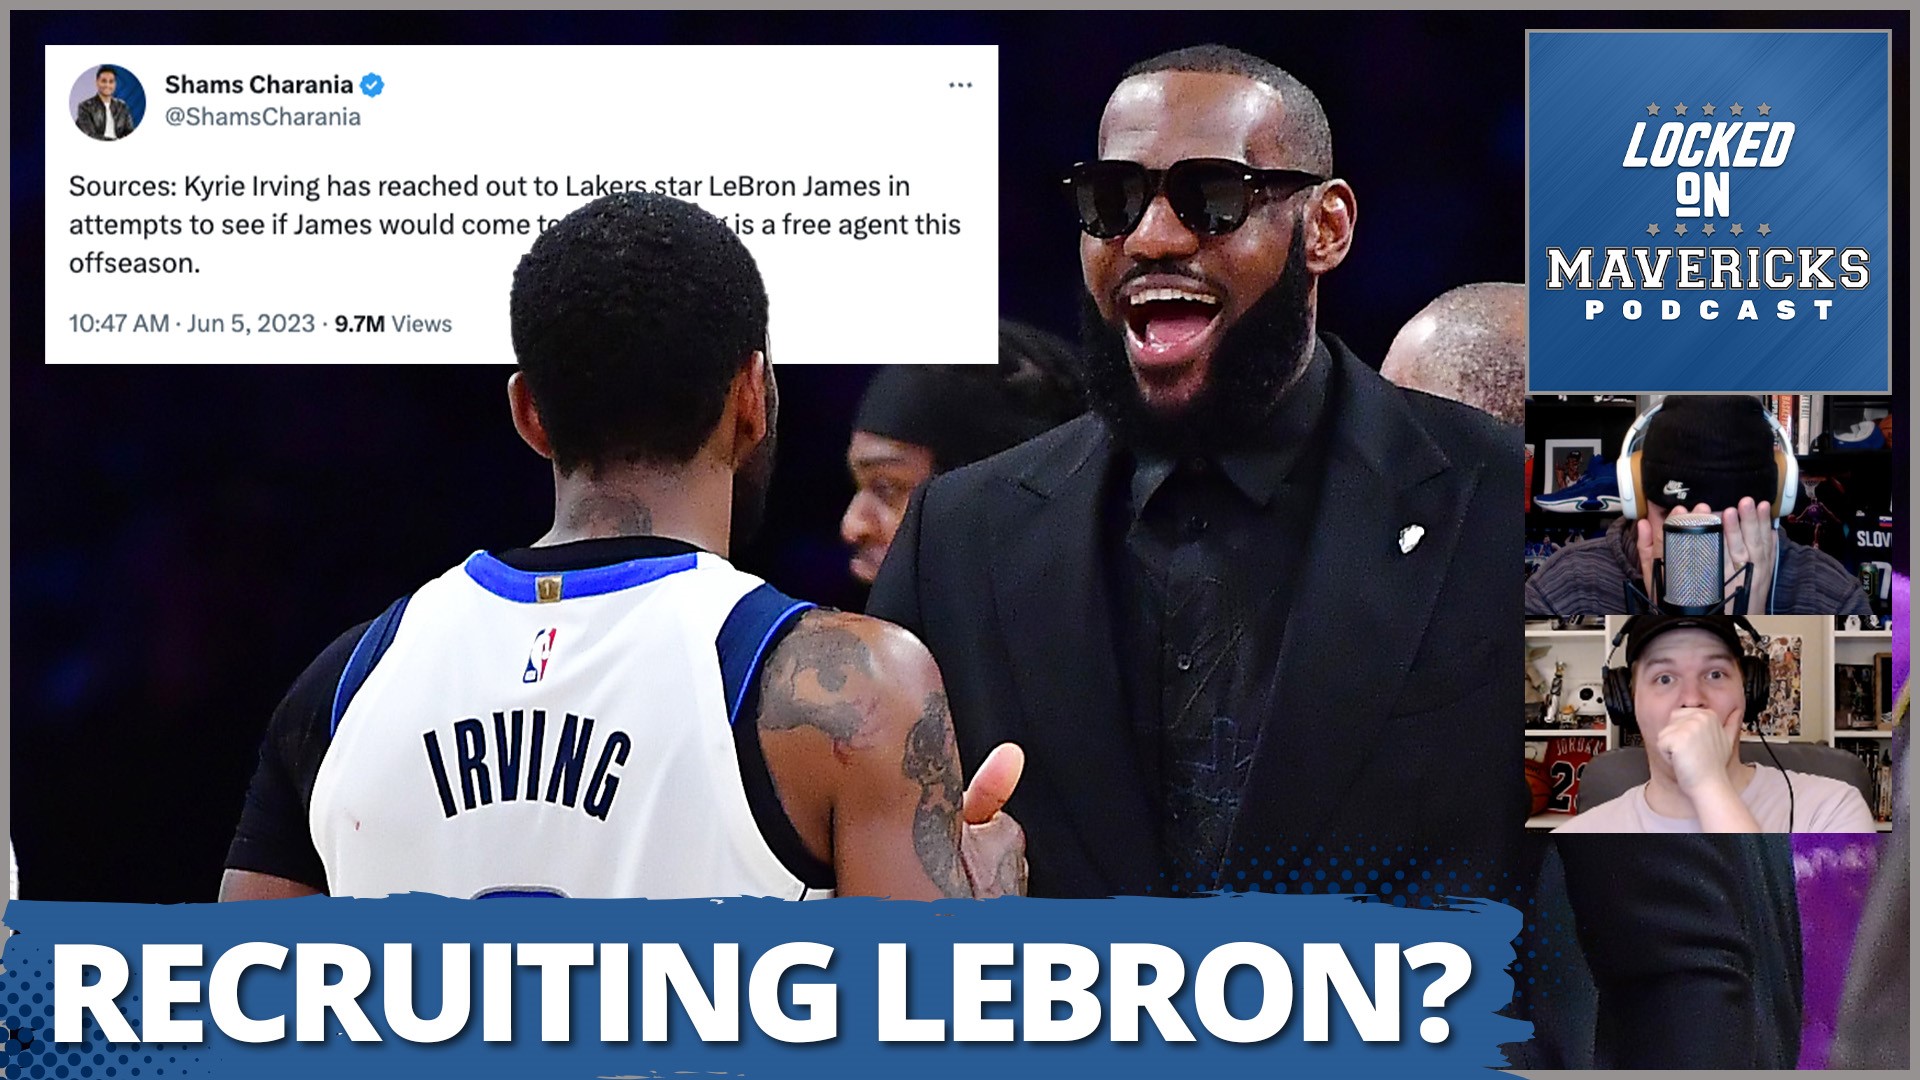 Nick Angstadt & Isaac Harris discuss the rumor that Kyrie Irving is recruiting Lebron James to join Luka Doncic on the Dallas Mavericks. Who does this story benefit?